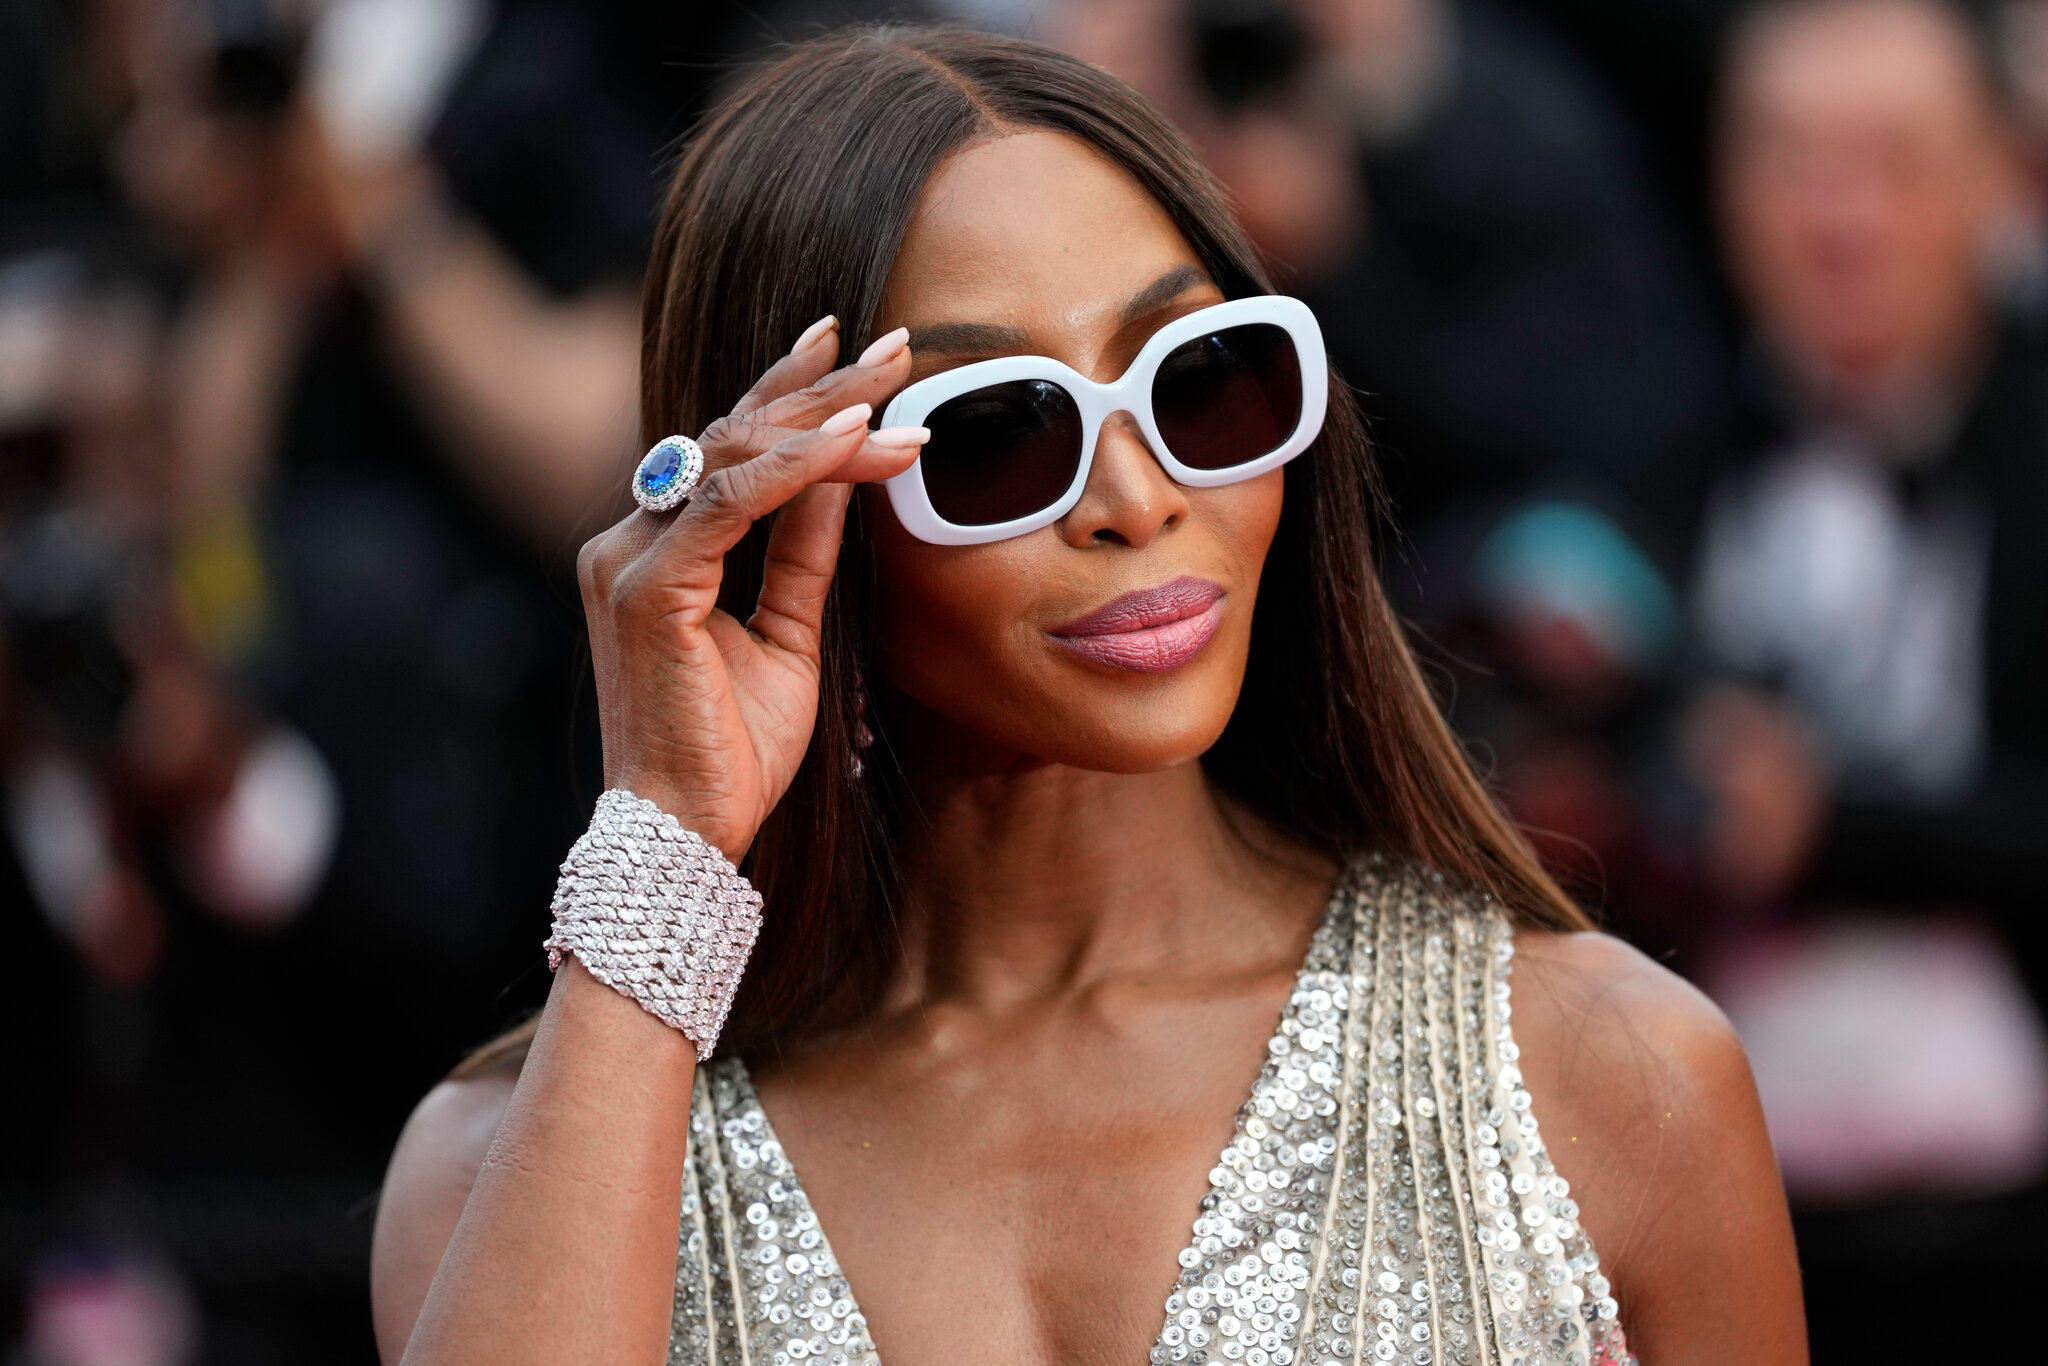 Naomi Campbell Posing for Pictures at the Cannes Film Festival